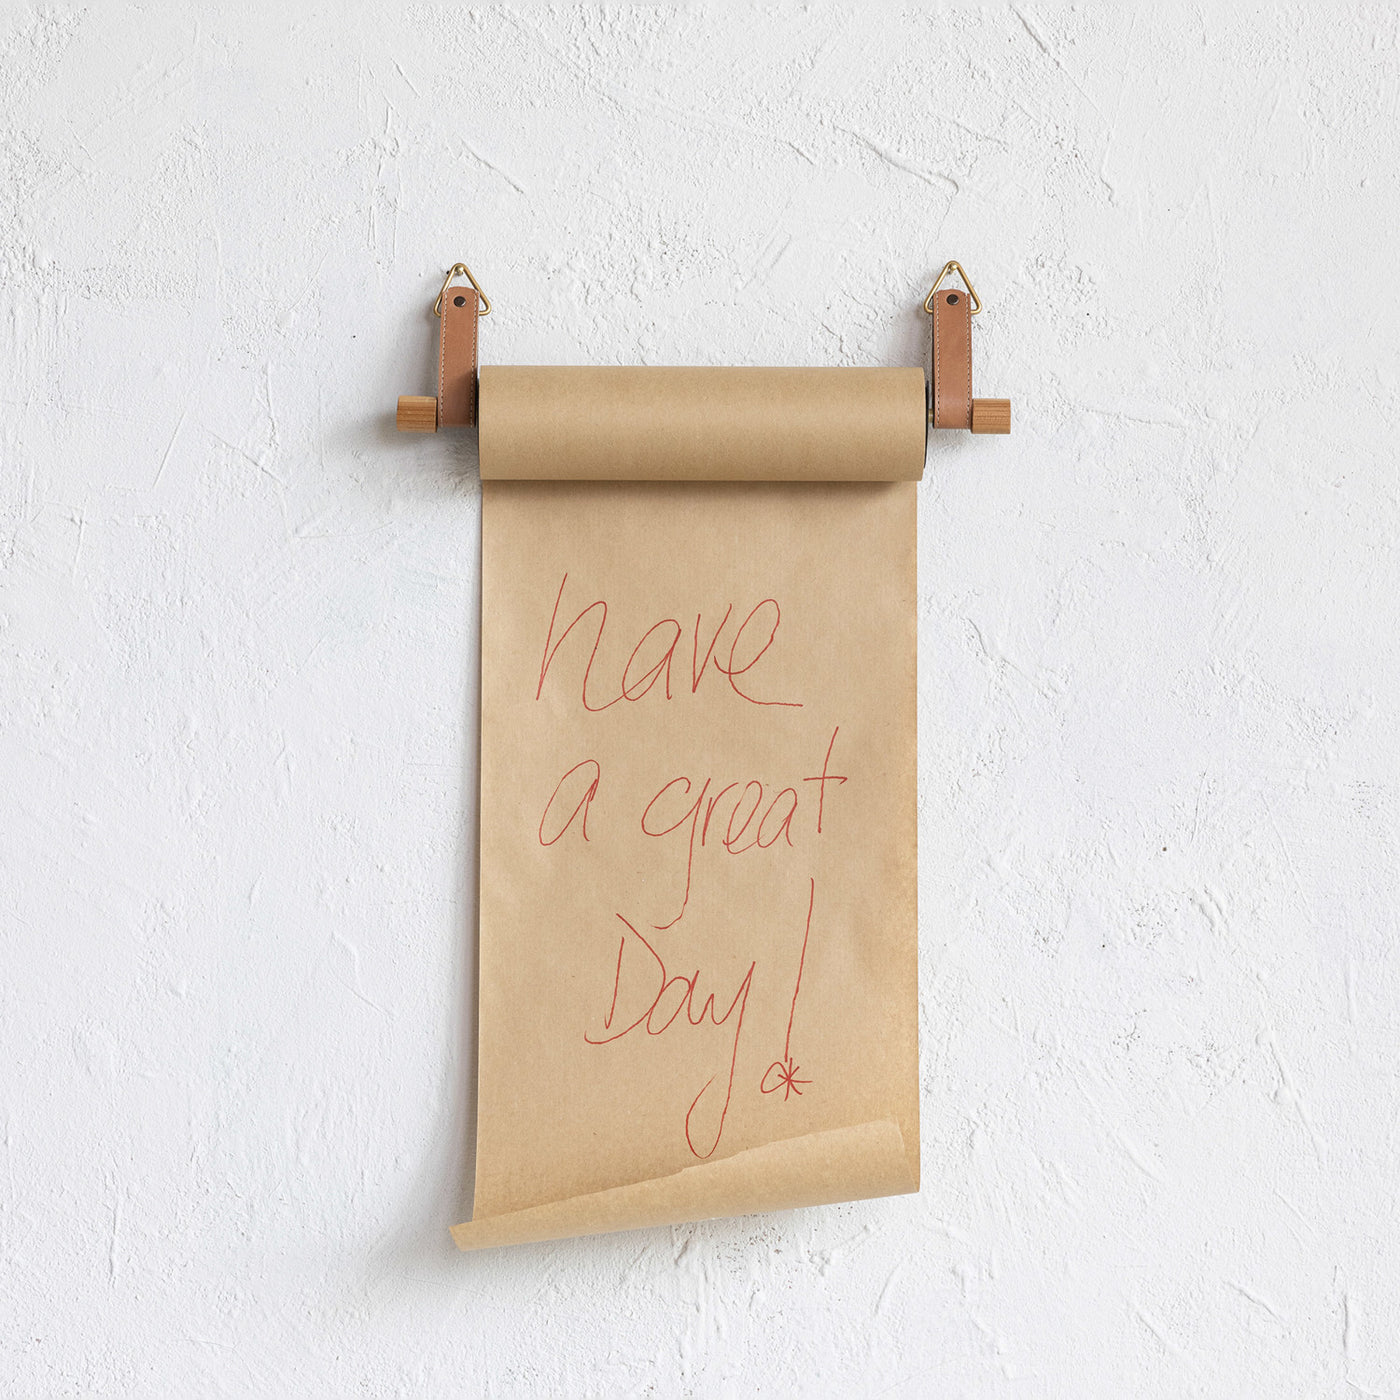 Wood Wall Mounted Paper Dispenser